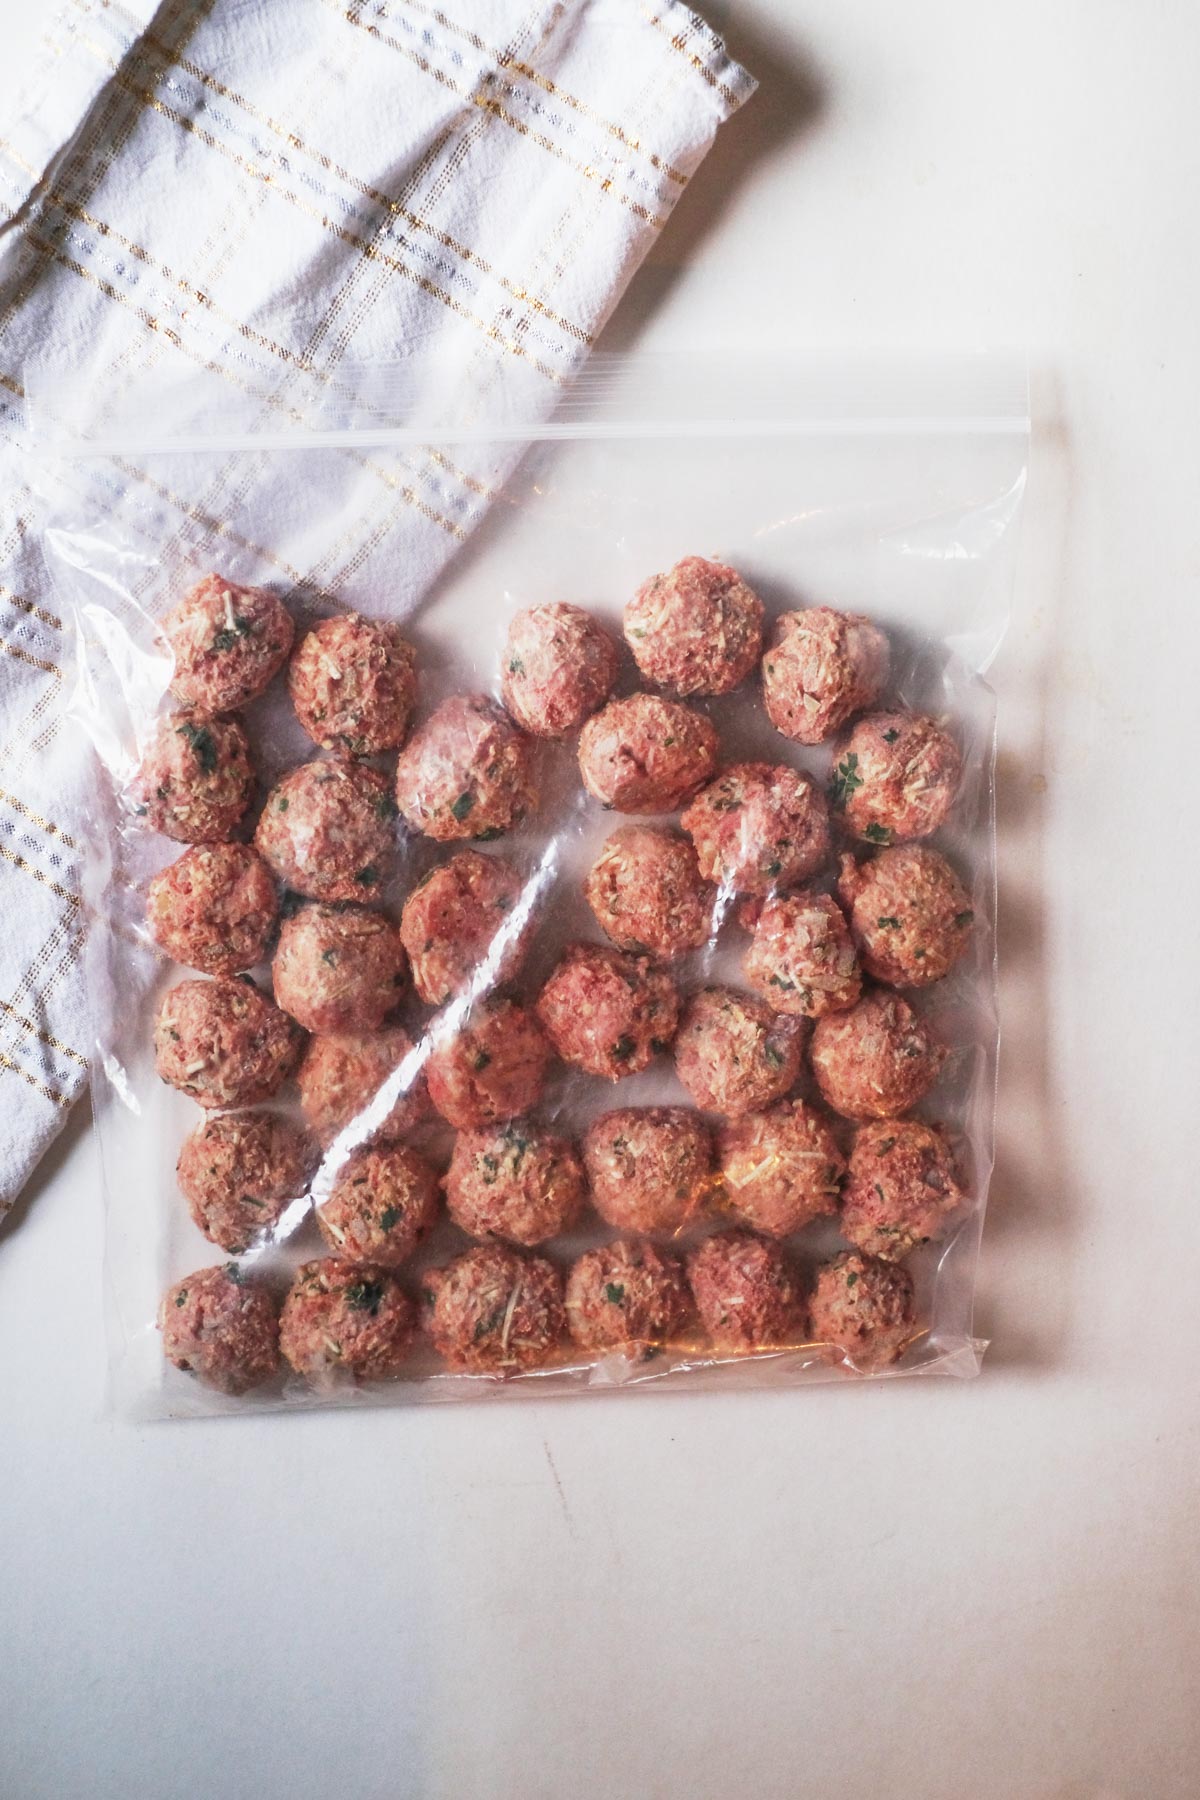 top down view of the frozen meat balls in a plastic storage bag